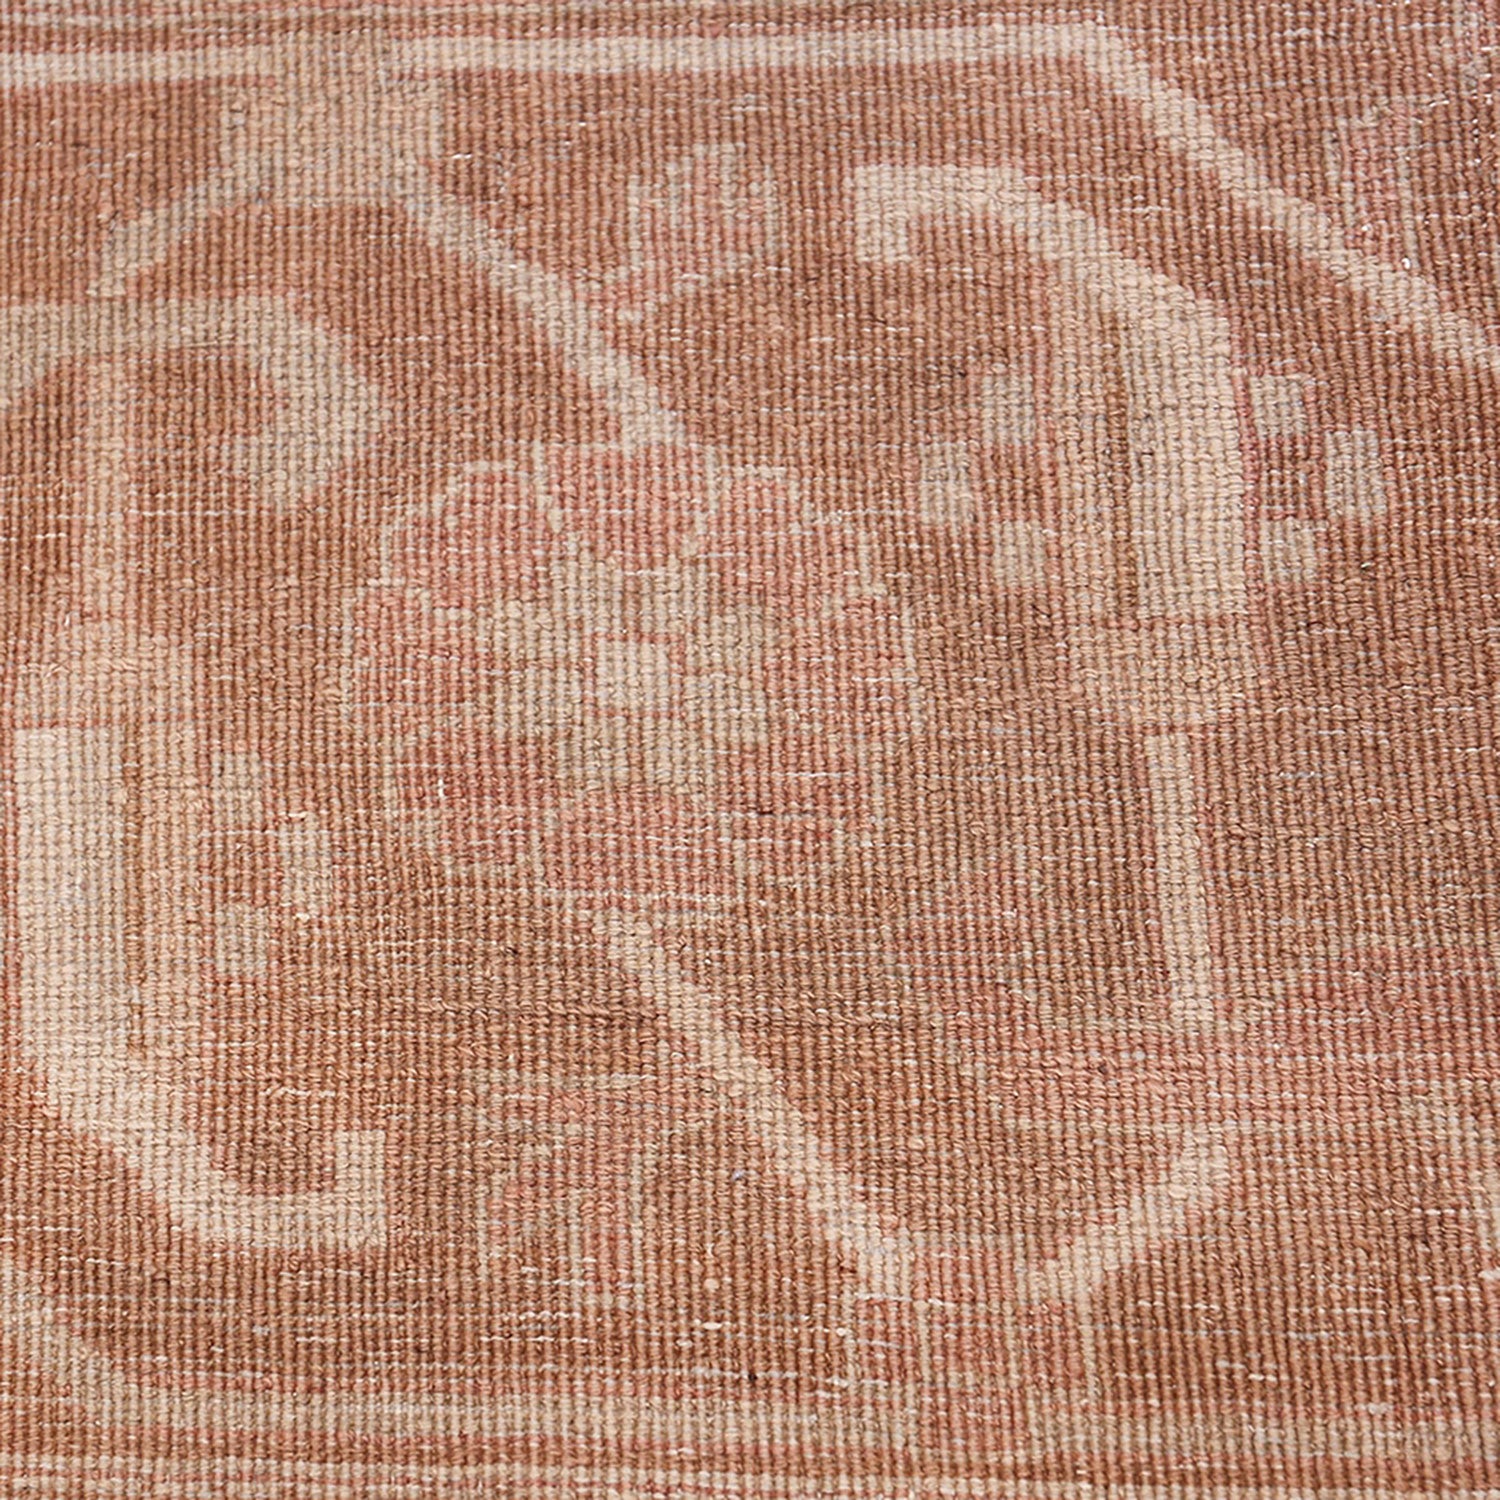 Close-up of a pink, tan, and white woven fabric pattern.